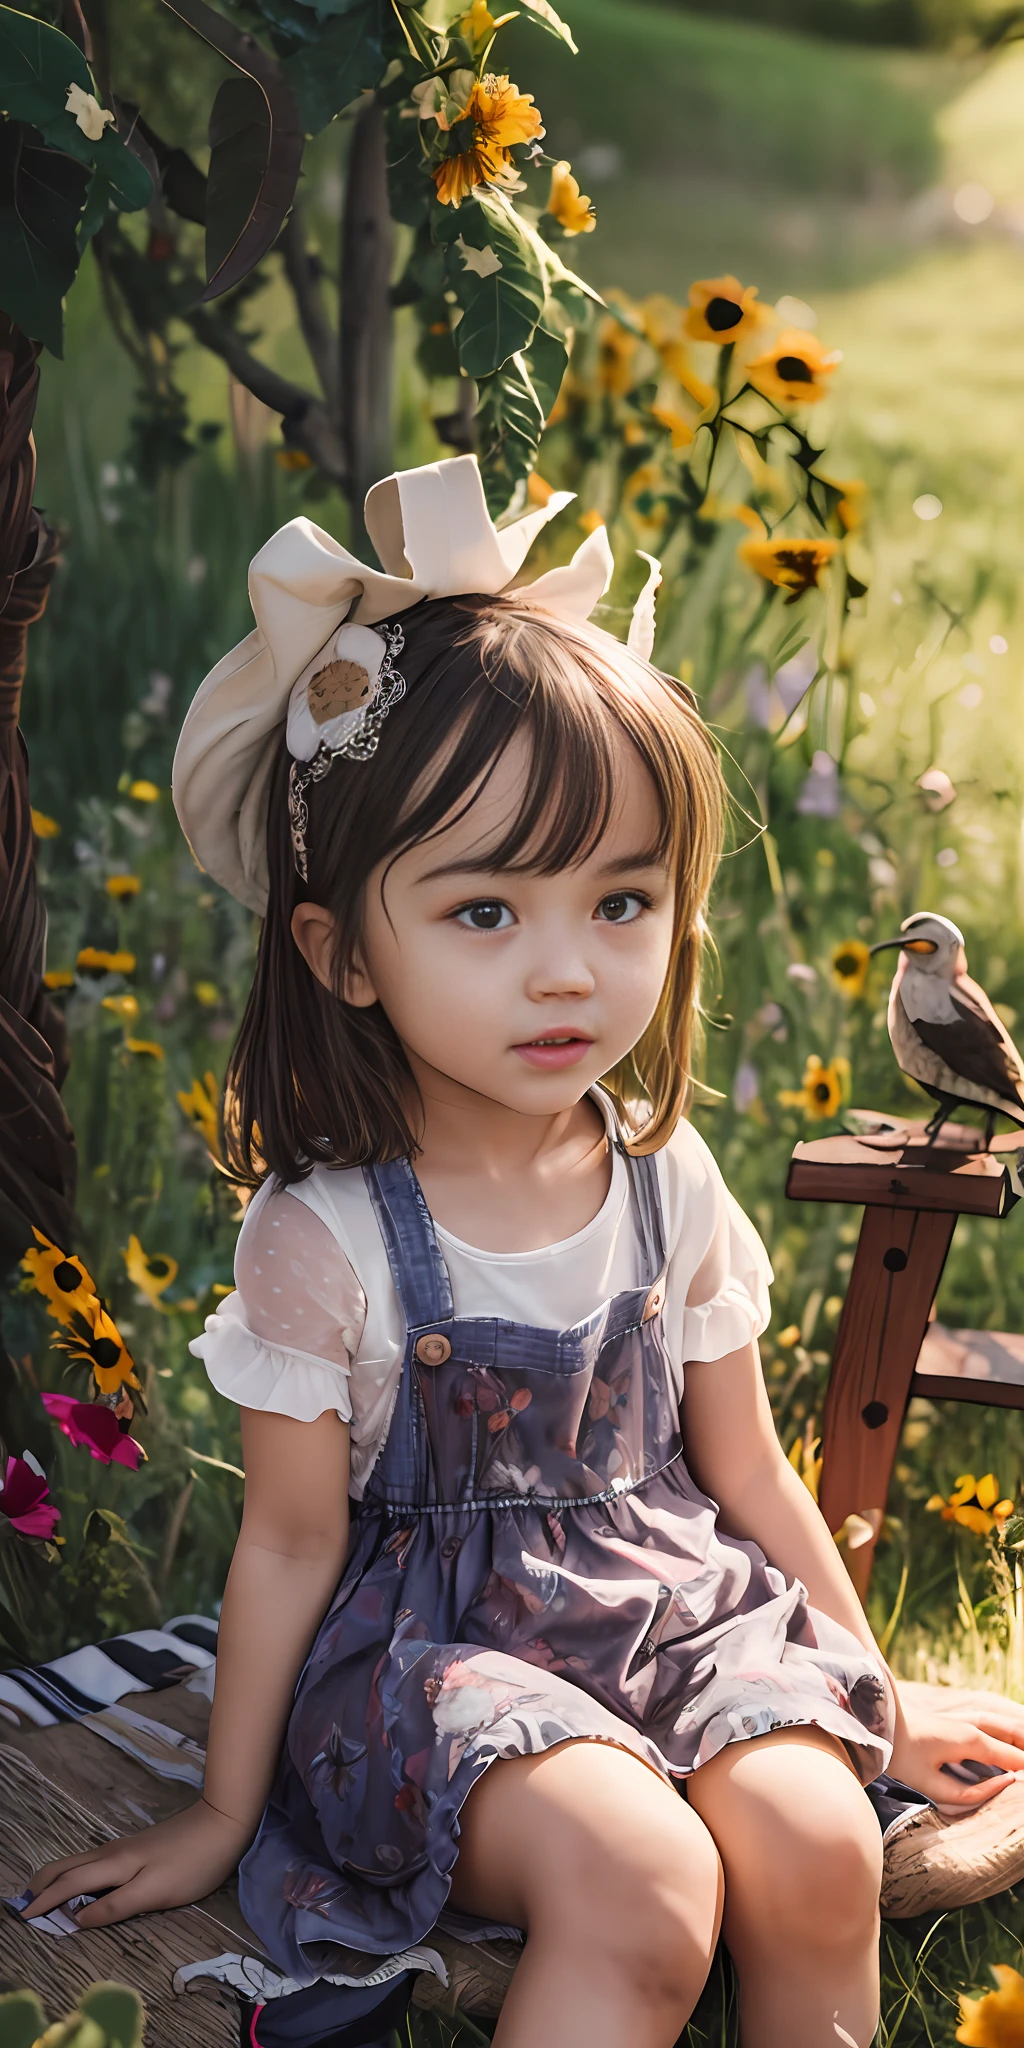 High Detail, Ultra Detail, 8K, Ultra High Resolution A cute and innocent girl, , toddler, enjoying her time in the open field, surrounded by the beauty of nature, warm sun sprinkling on her, wildflowers gently swaying in the breeze. Butterflies and birds flutter around her, adding to the playful atmosphere,